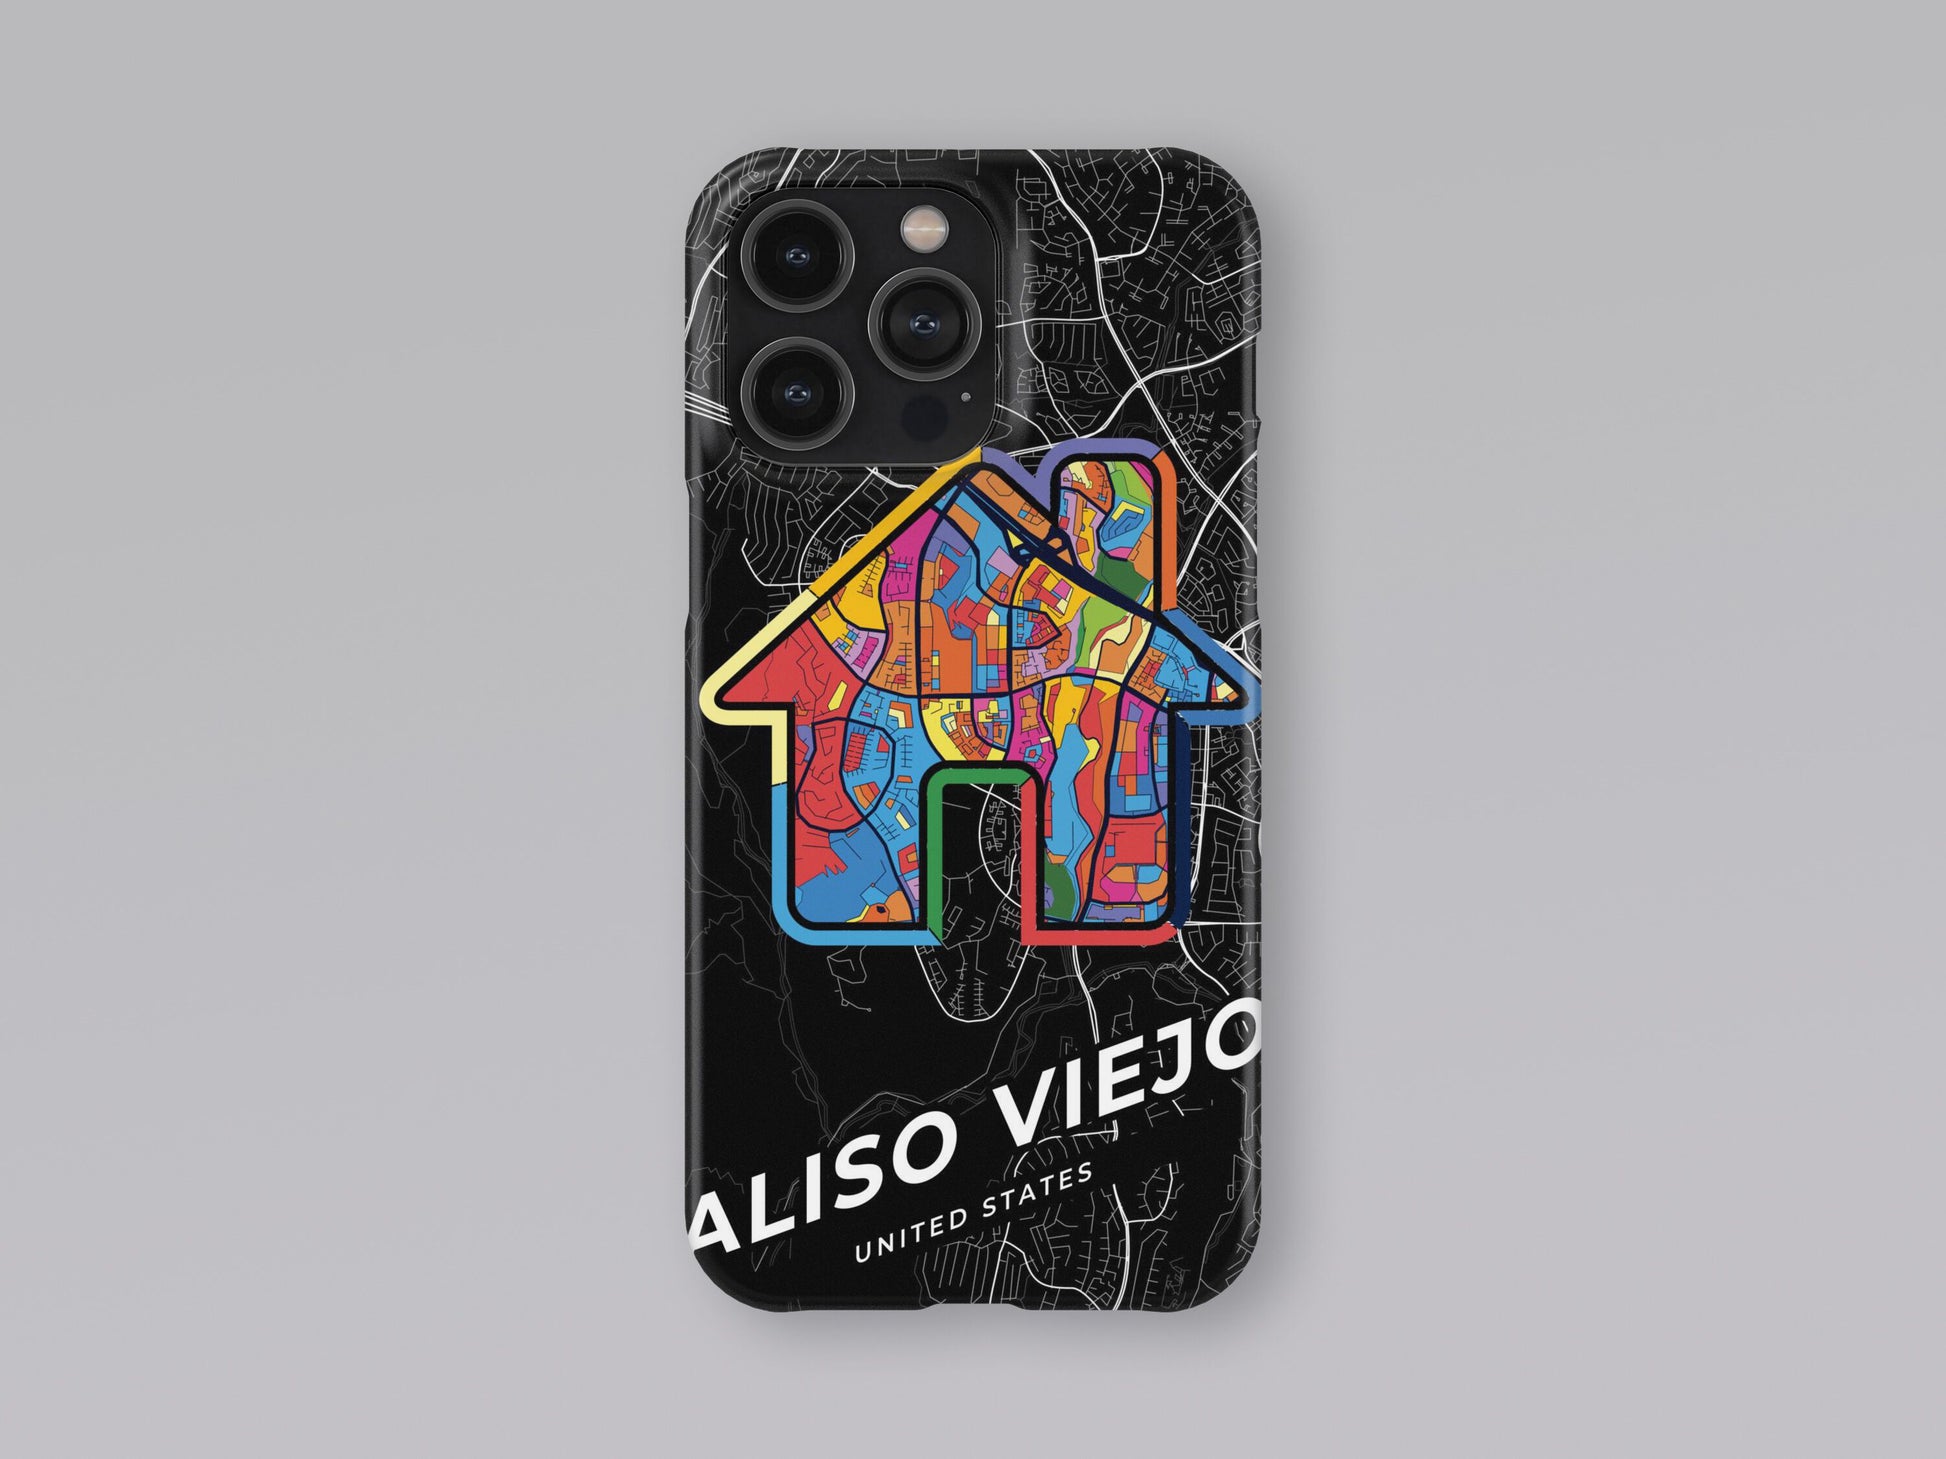 Aliso Viejo California slim phone case with colorful icon. Birthday, wedding or housewarming gift. Couple match cases. 3